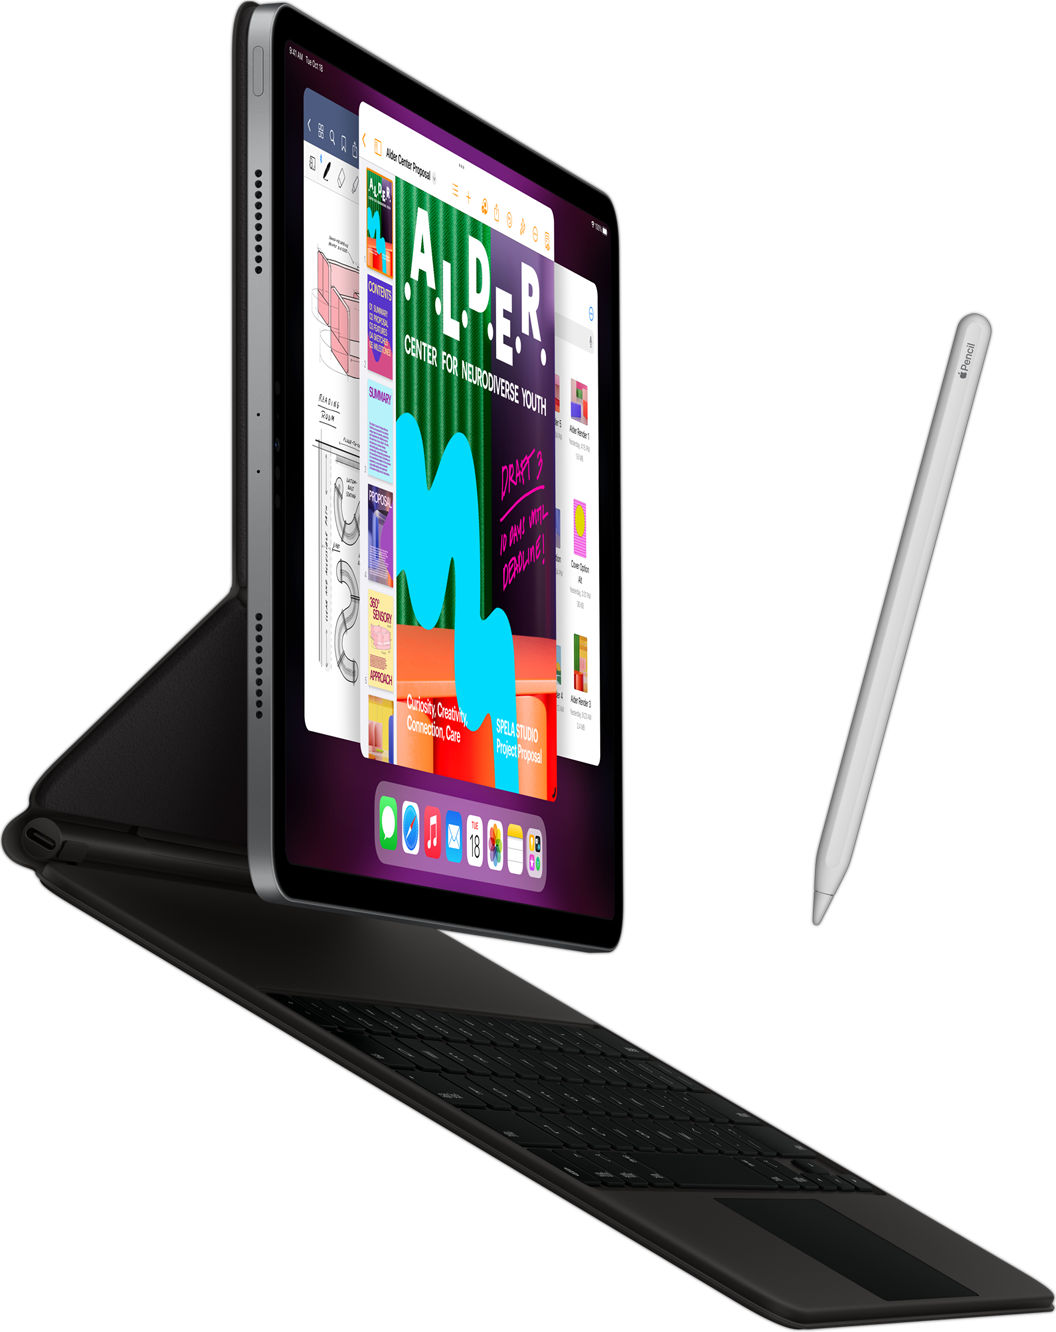 Side view of iPad Pro with Smart Keyboard Folio attached and Apple pencil.